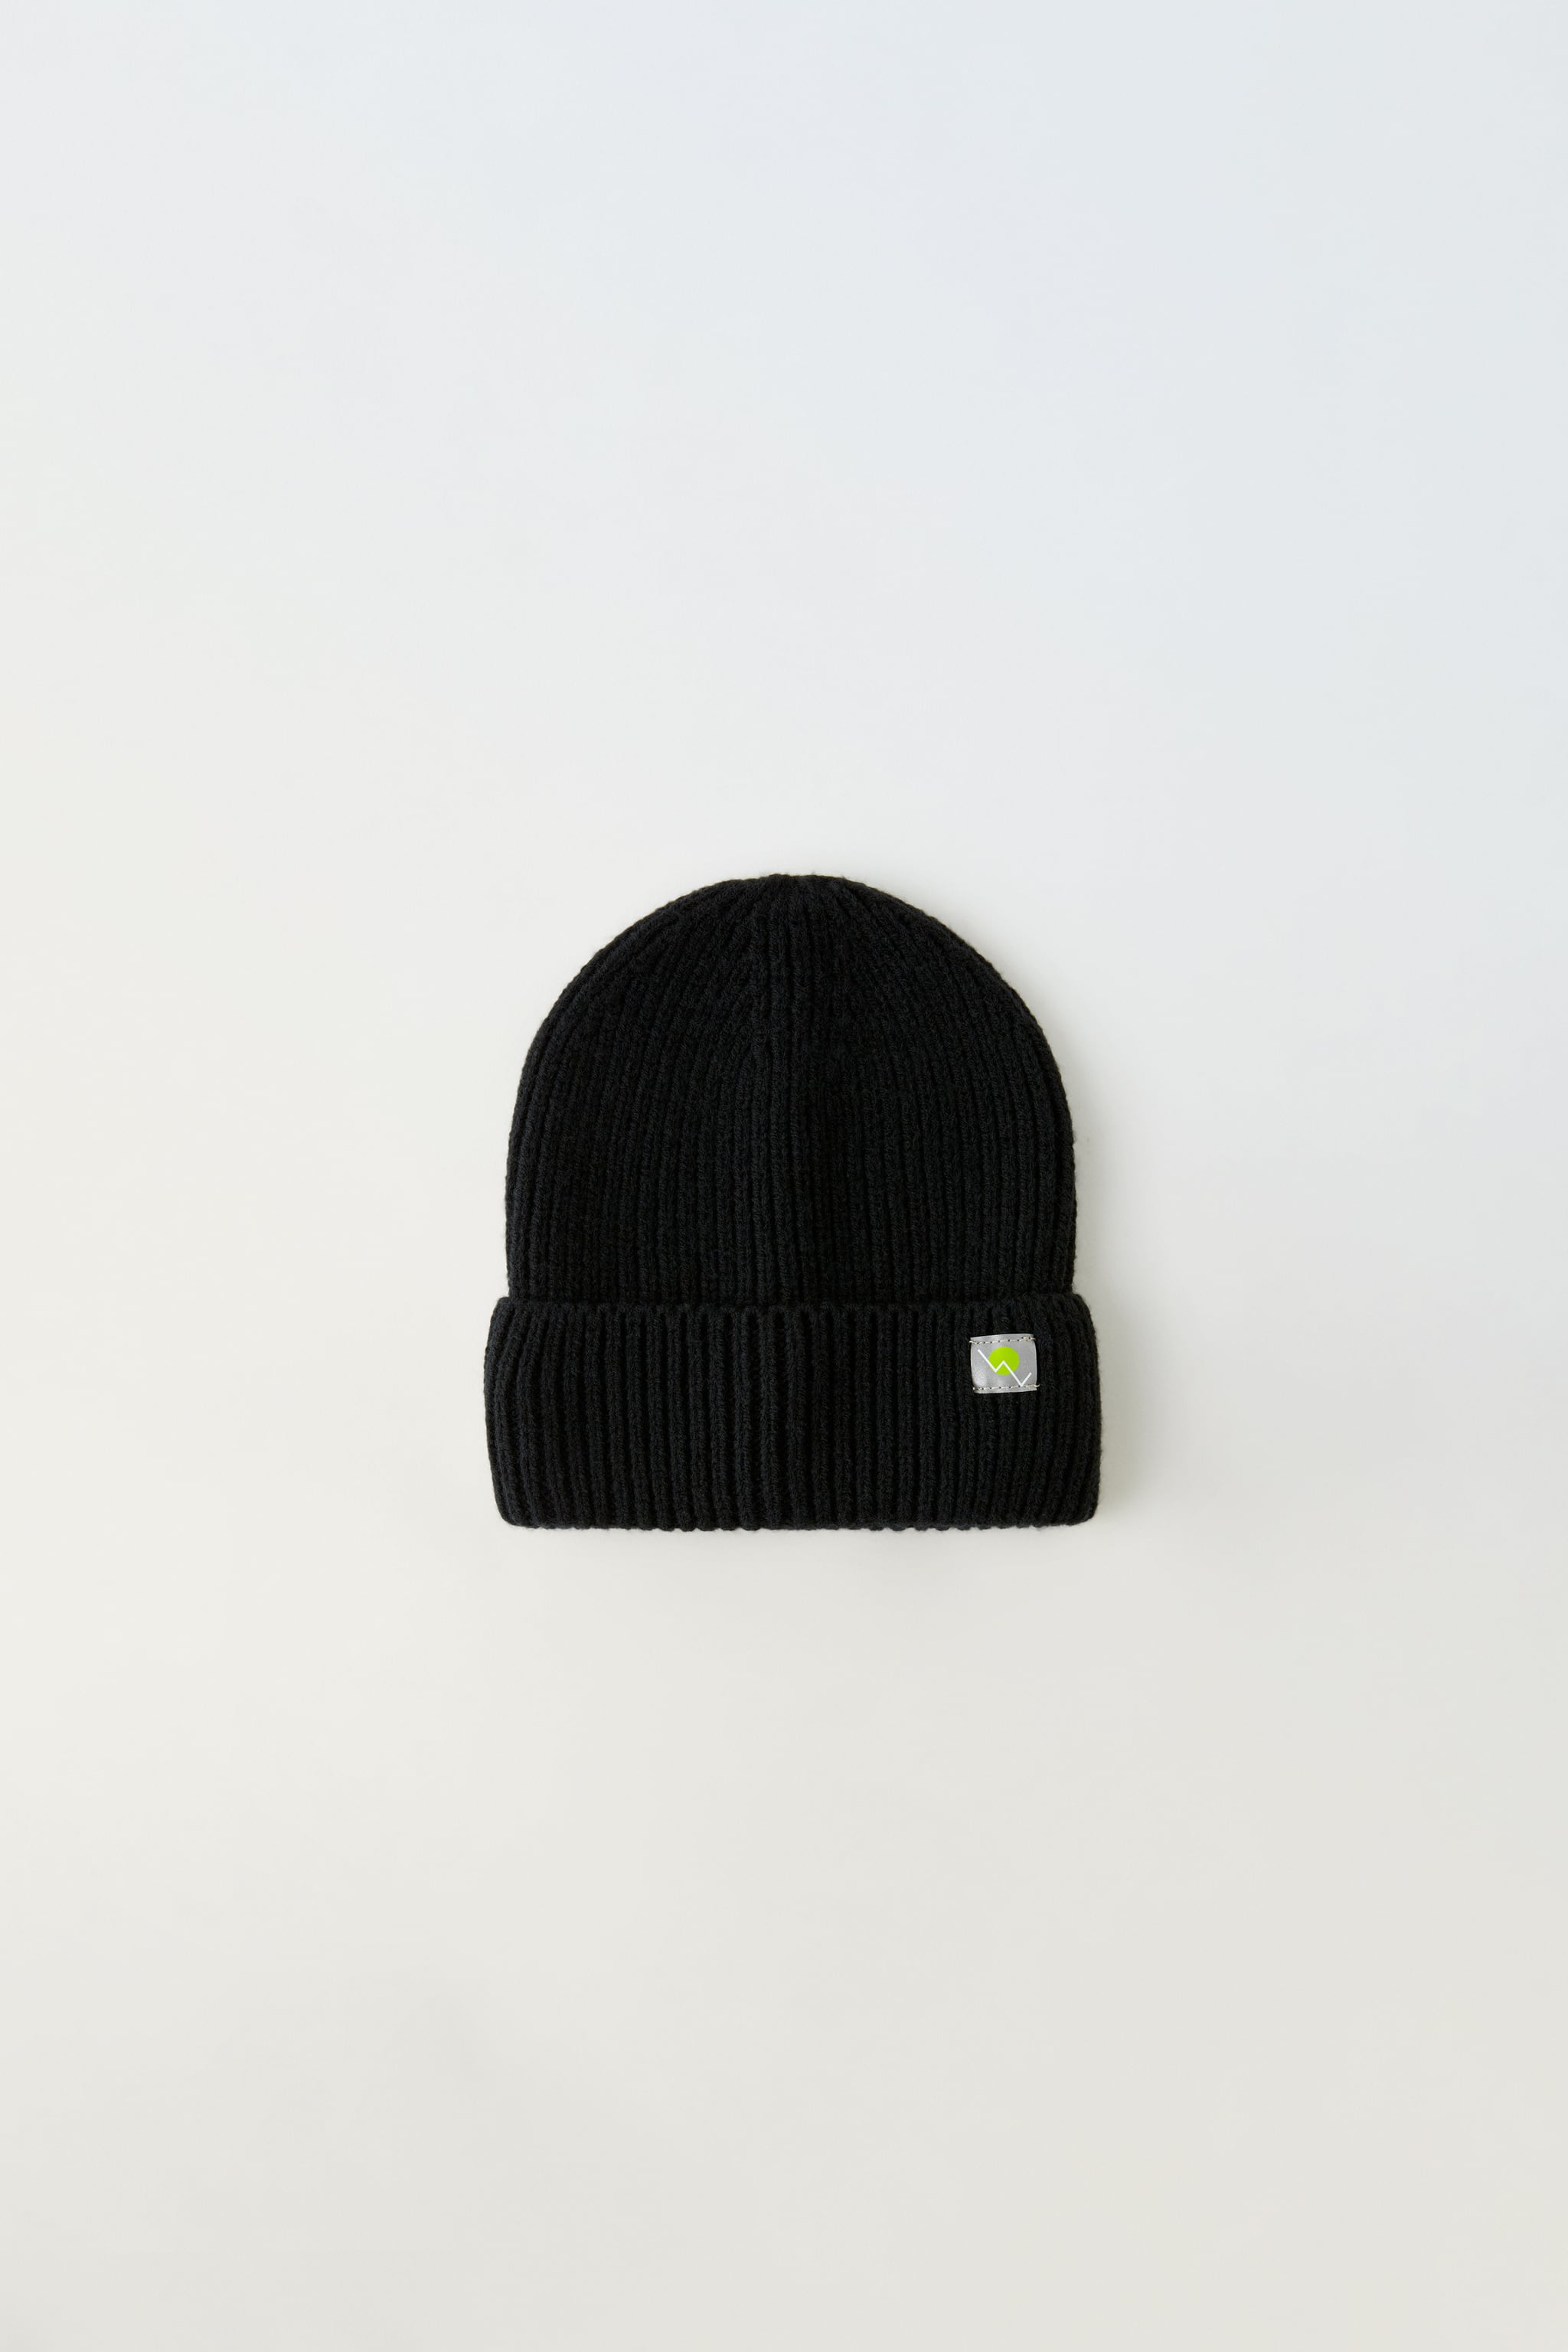 KNIT HAT SKI COLLECTION